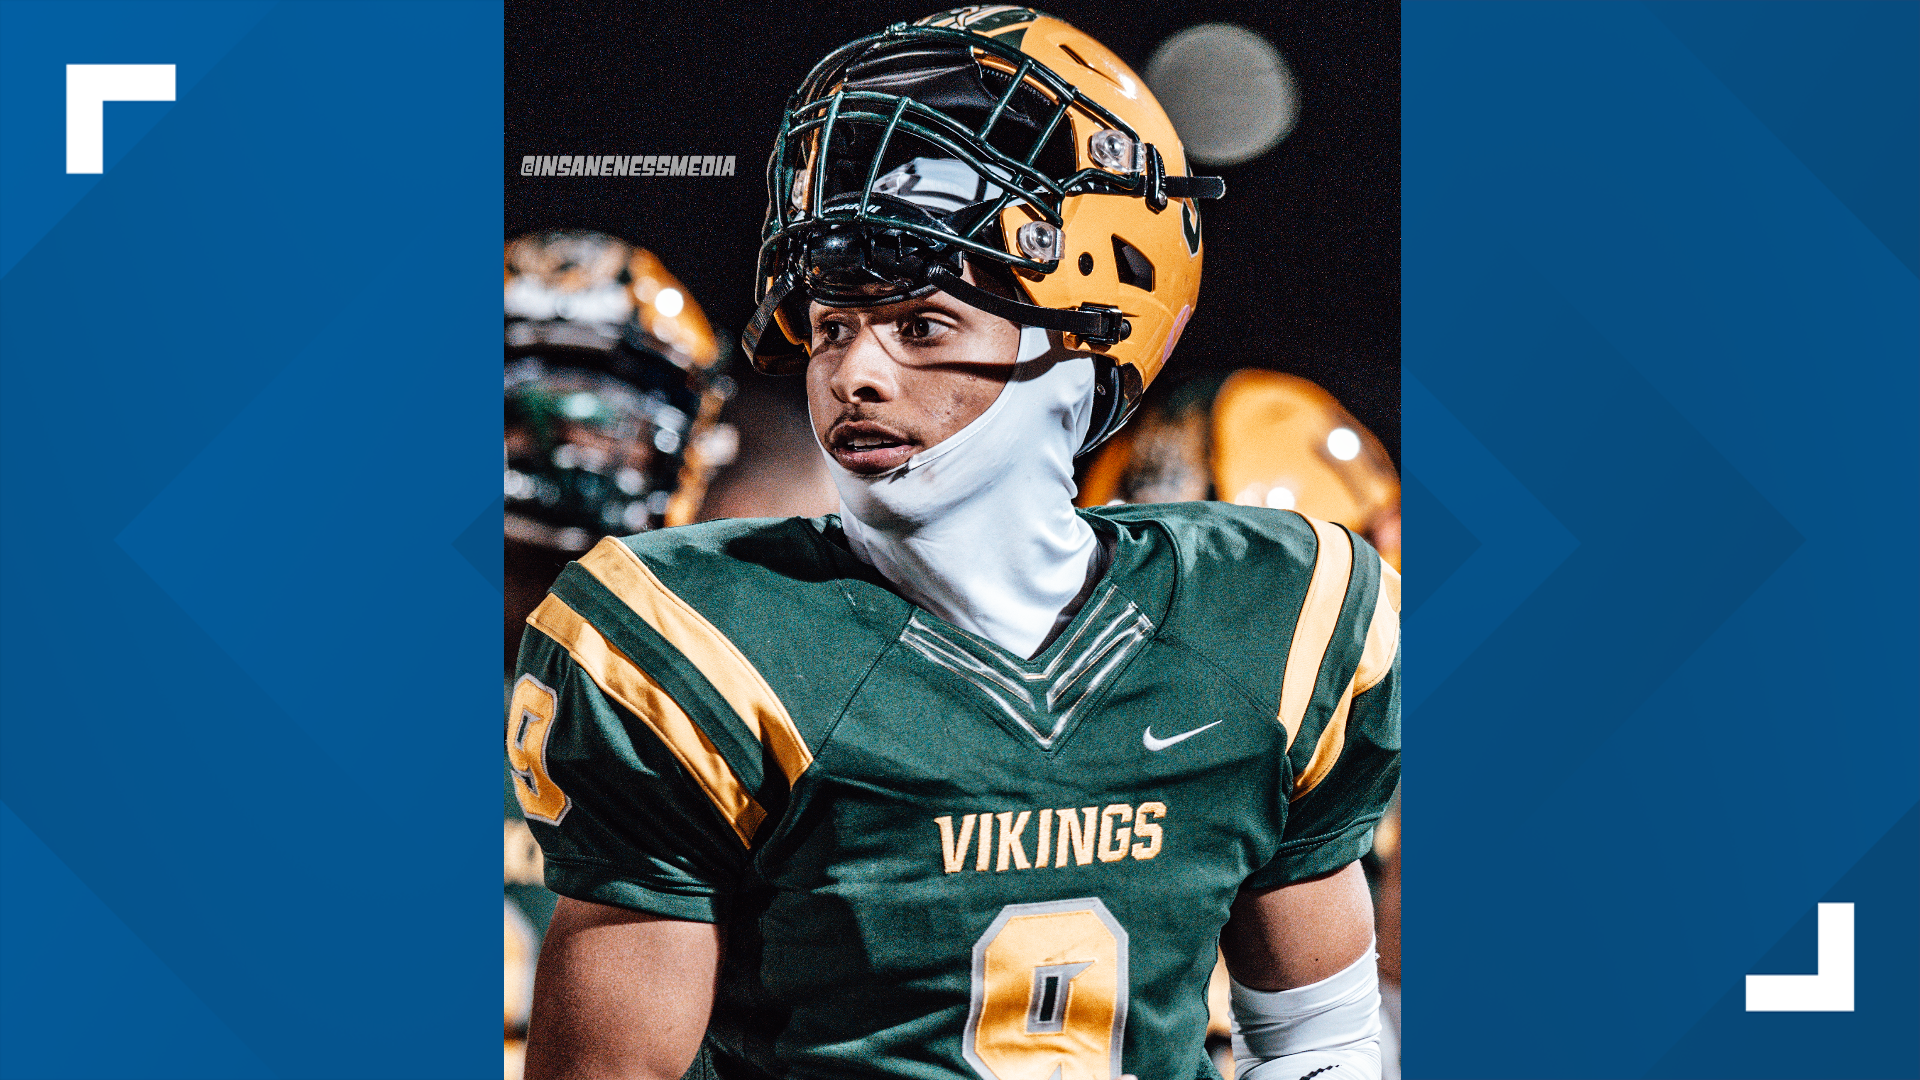 Fairfield is mourning the loss this month of Vanden High School student-athlete Daniel Hughes who had dreams of playing football at a D1 school and beyond.